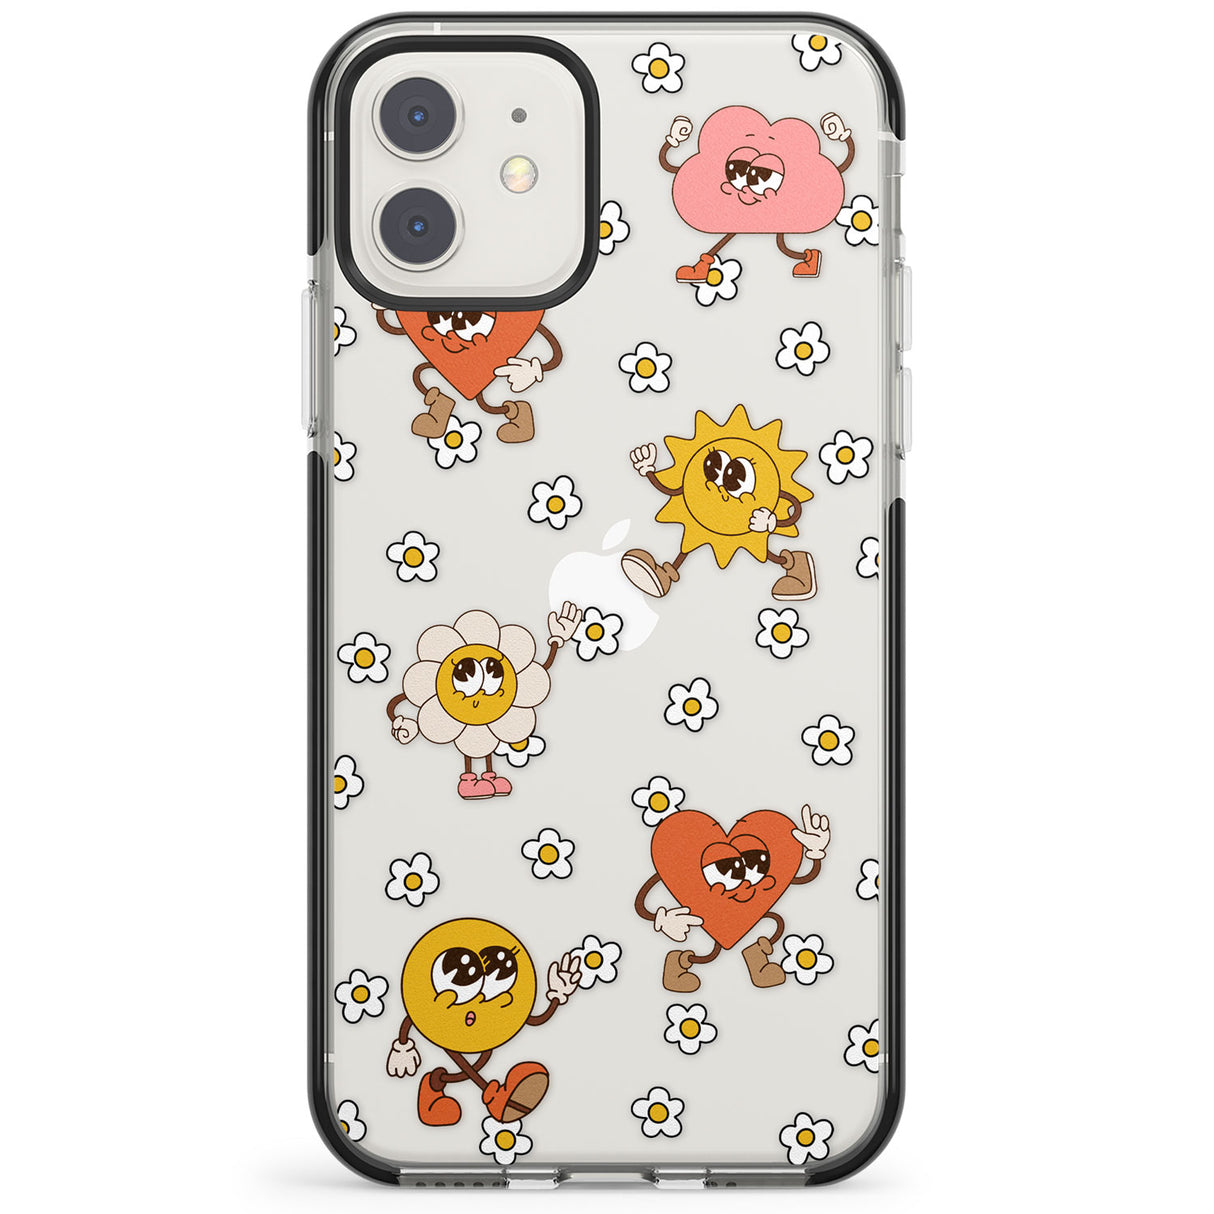 Daisies & Friends Impact Phone Case for iPhone 11, iphone 12